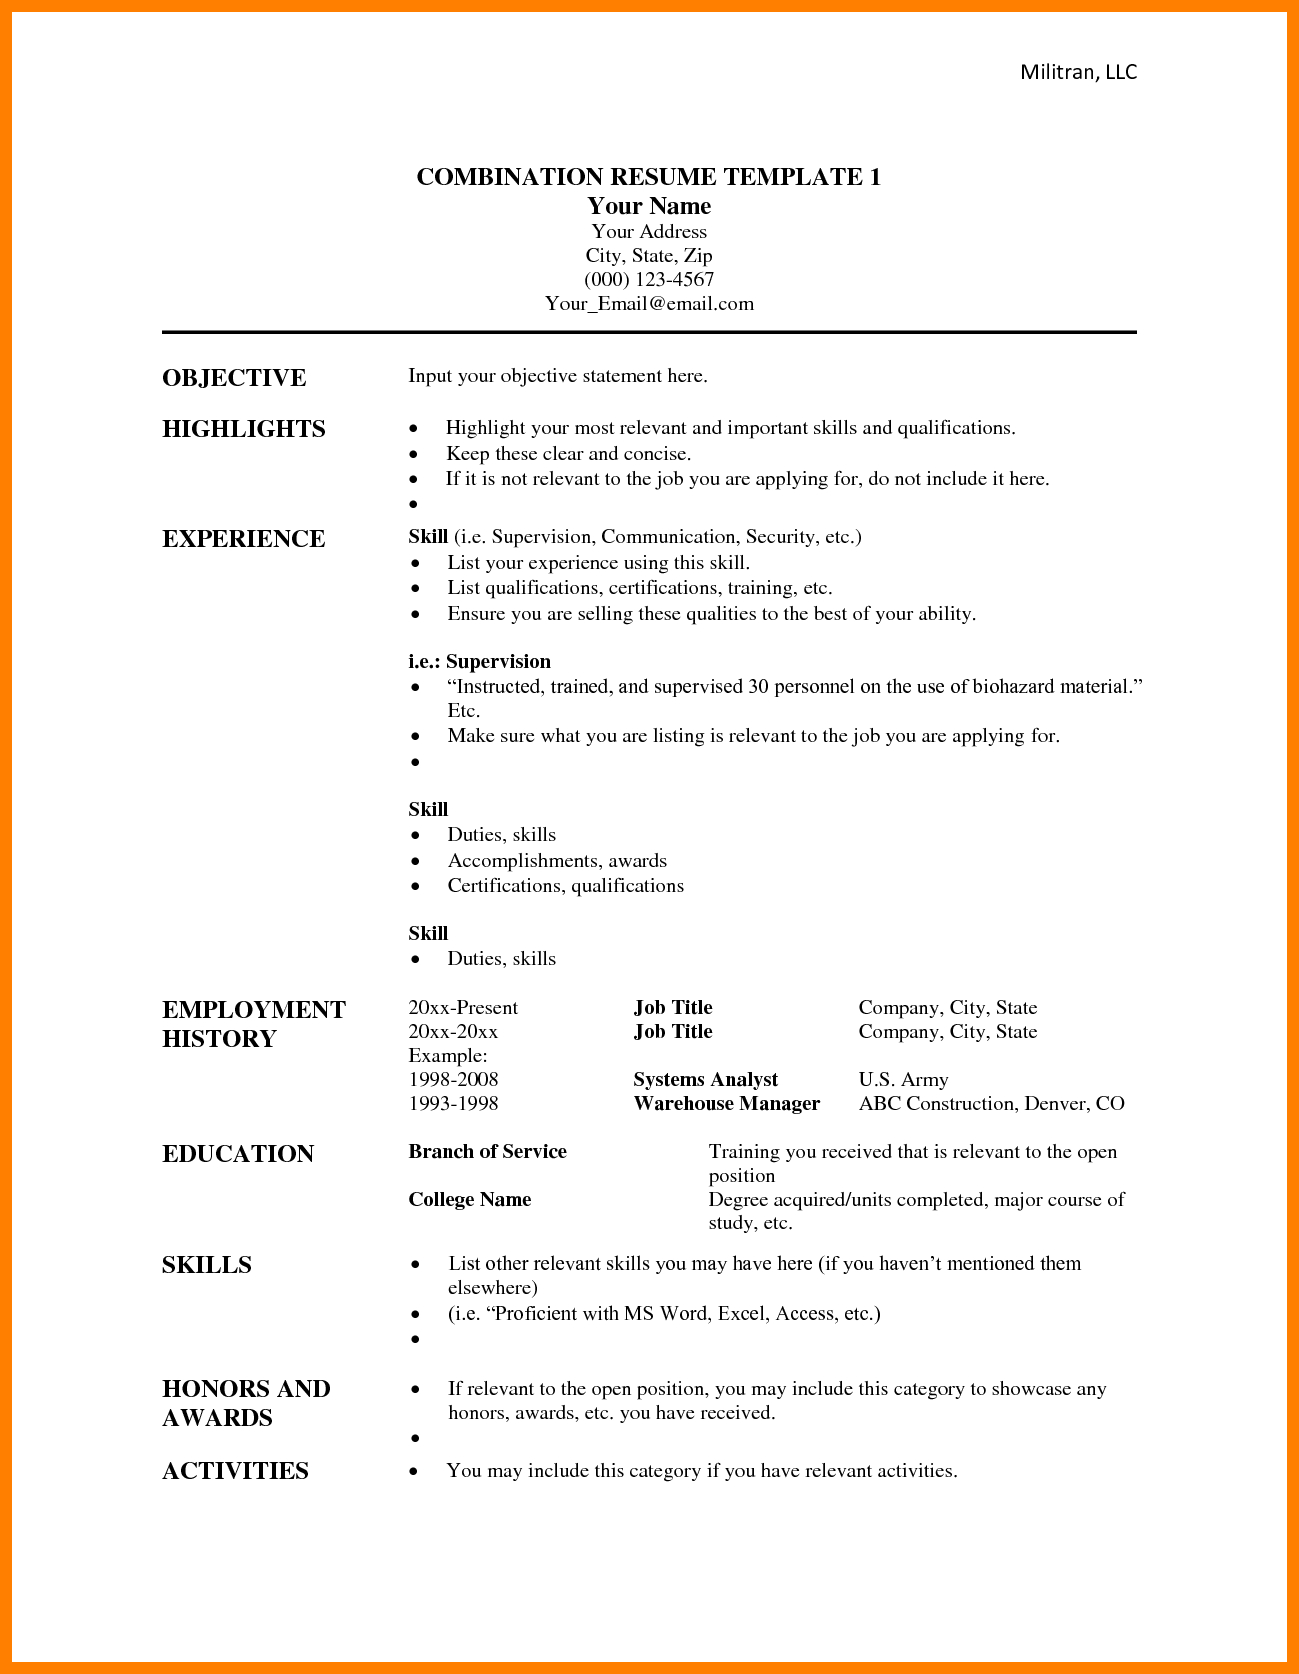 001 Functional Resume Template Microsoft Word Best With Regard To Combination Resume Template Word